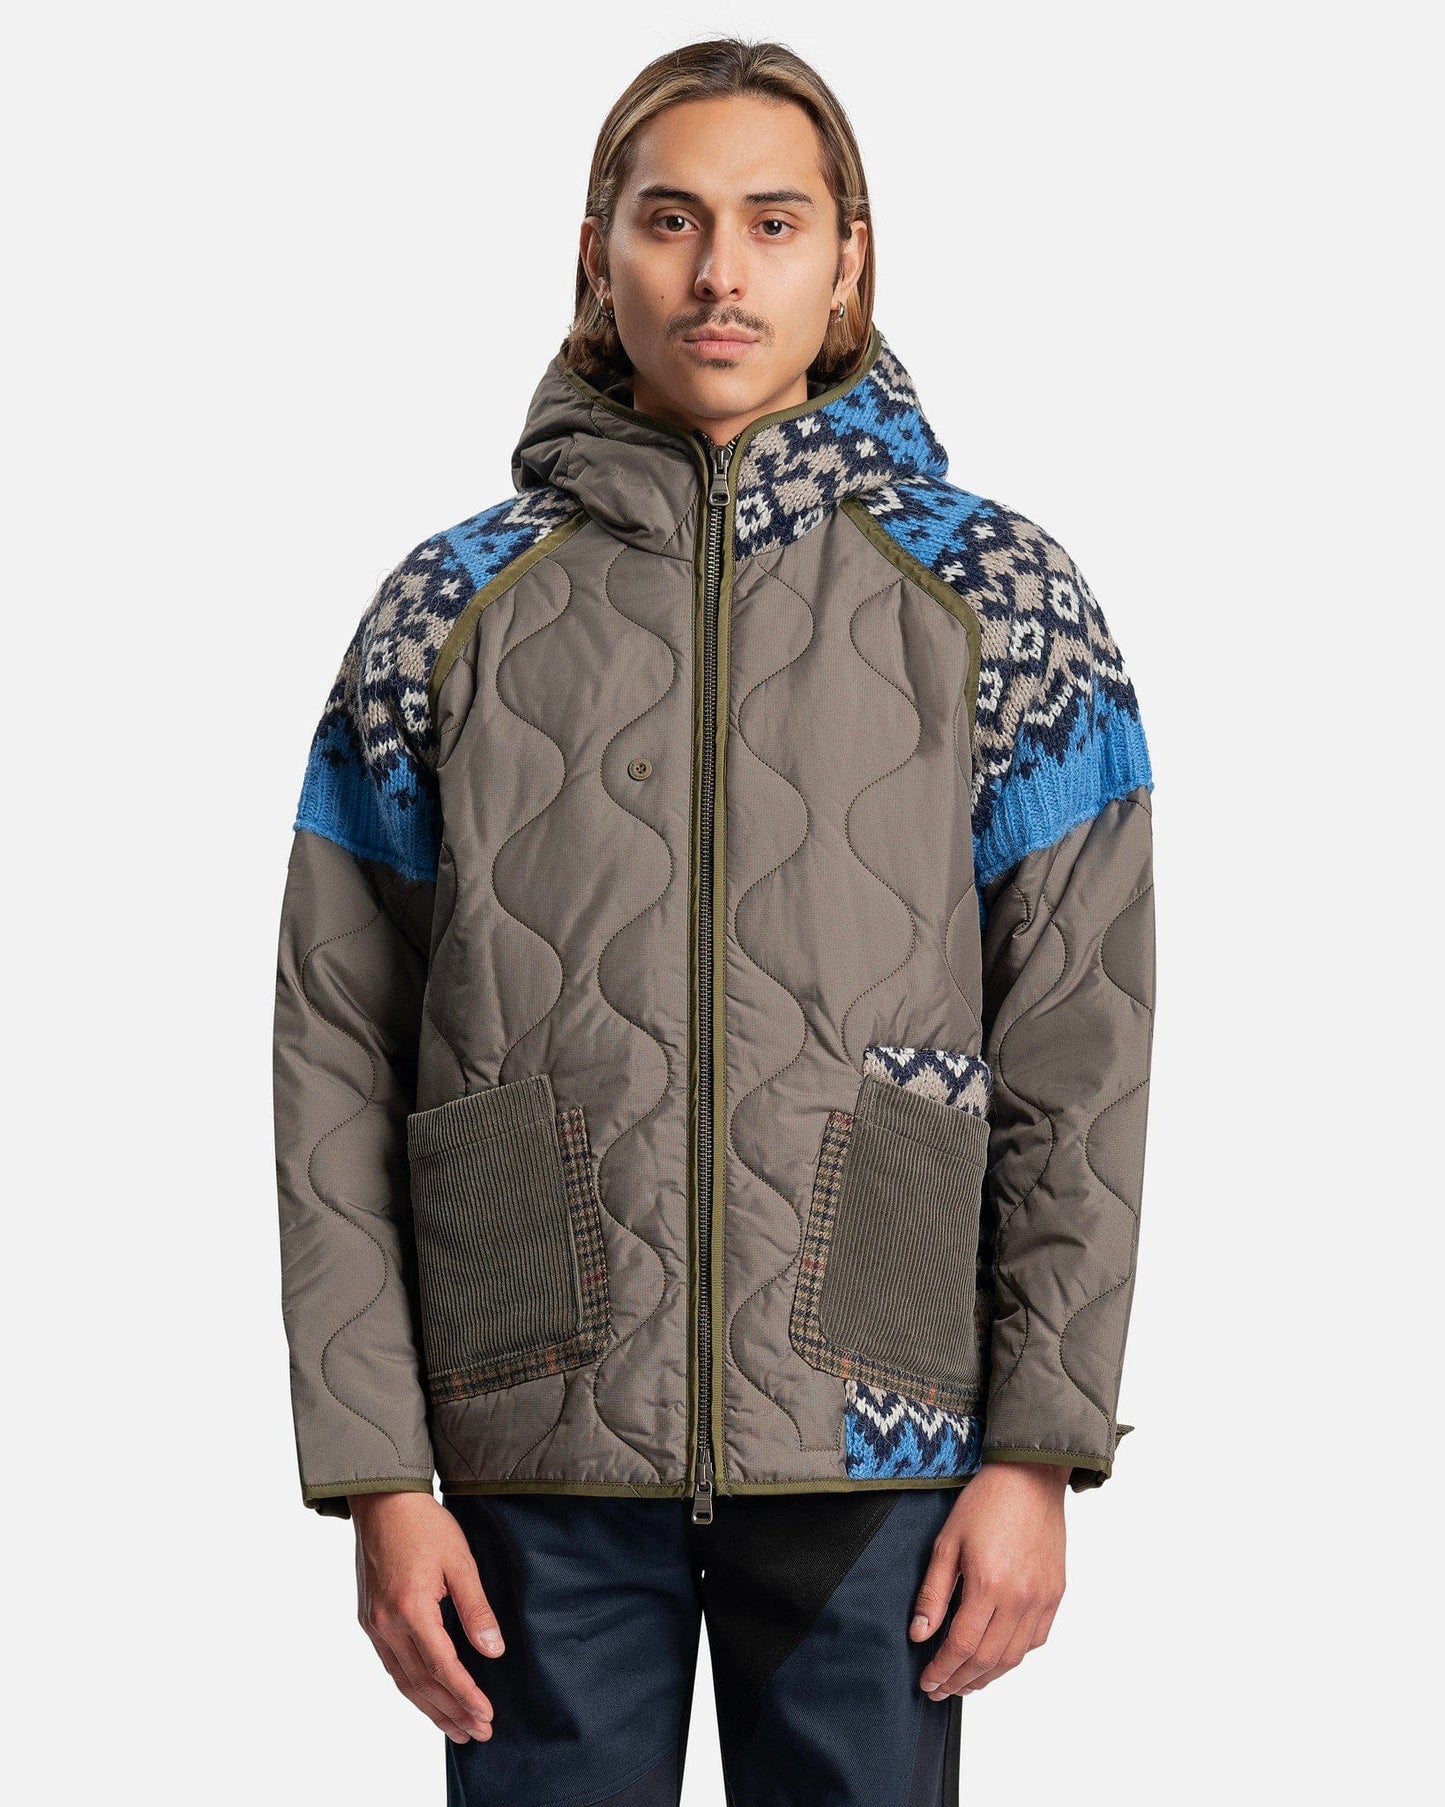 Andersson Bell Men's Jackets Knit Patch Quilted Jumper in Khaki